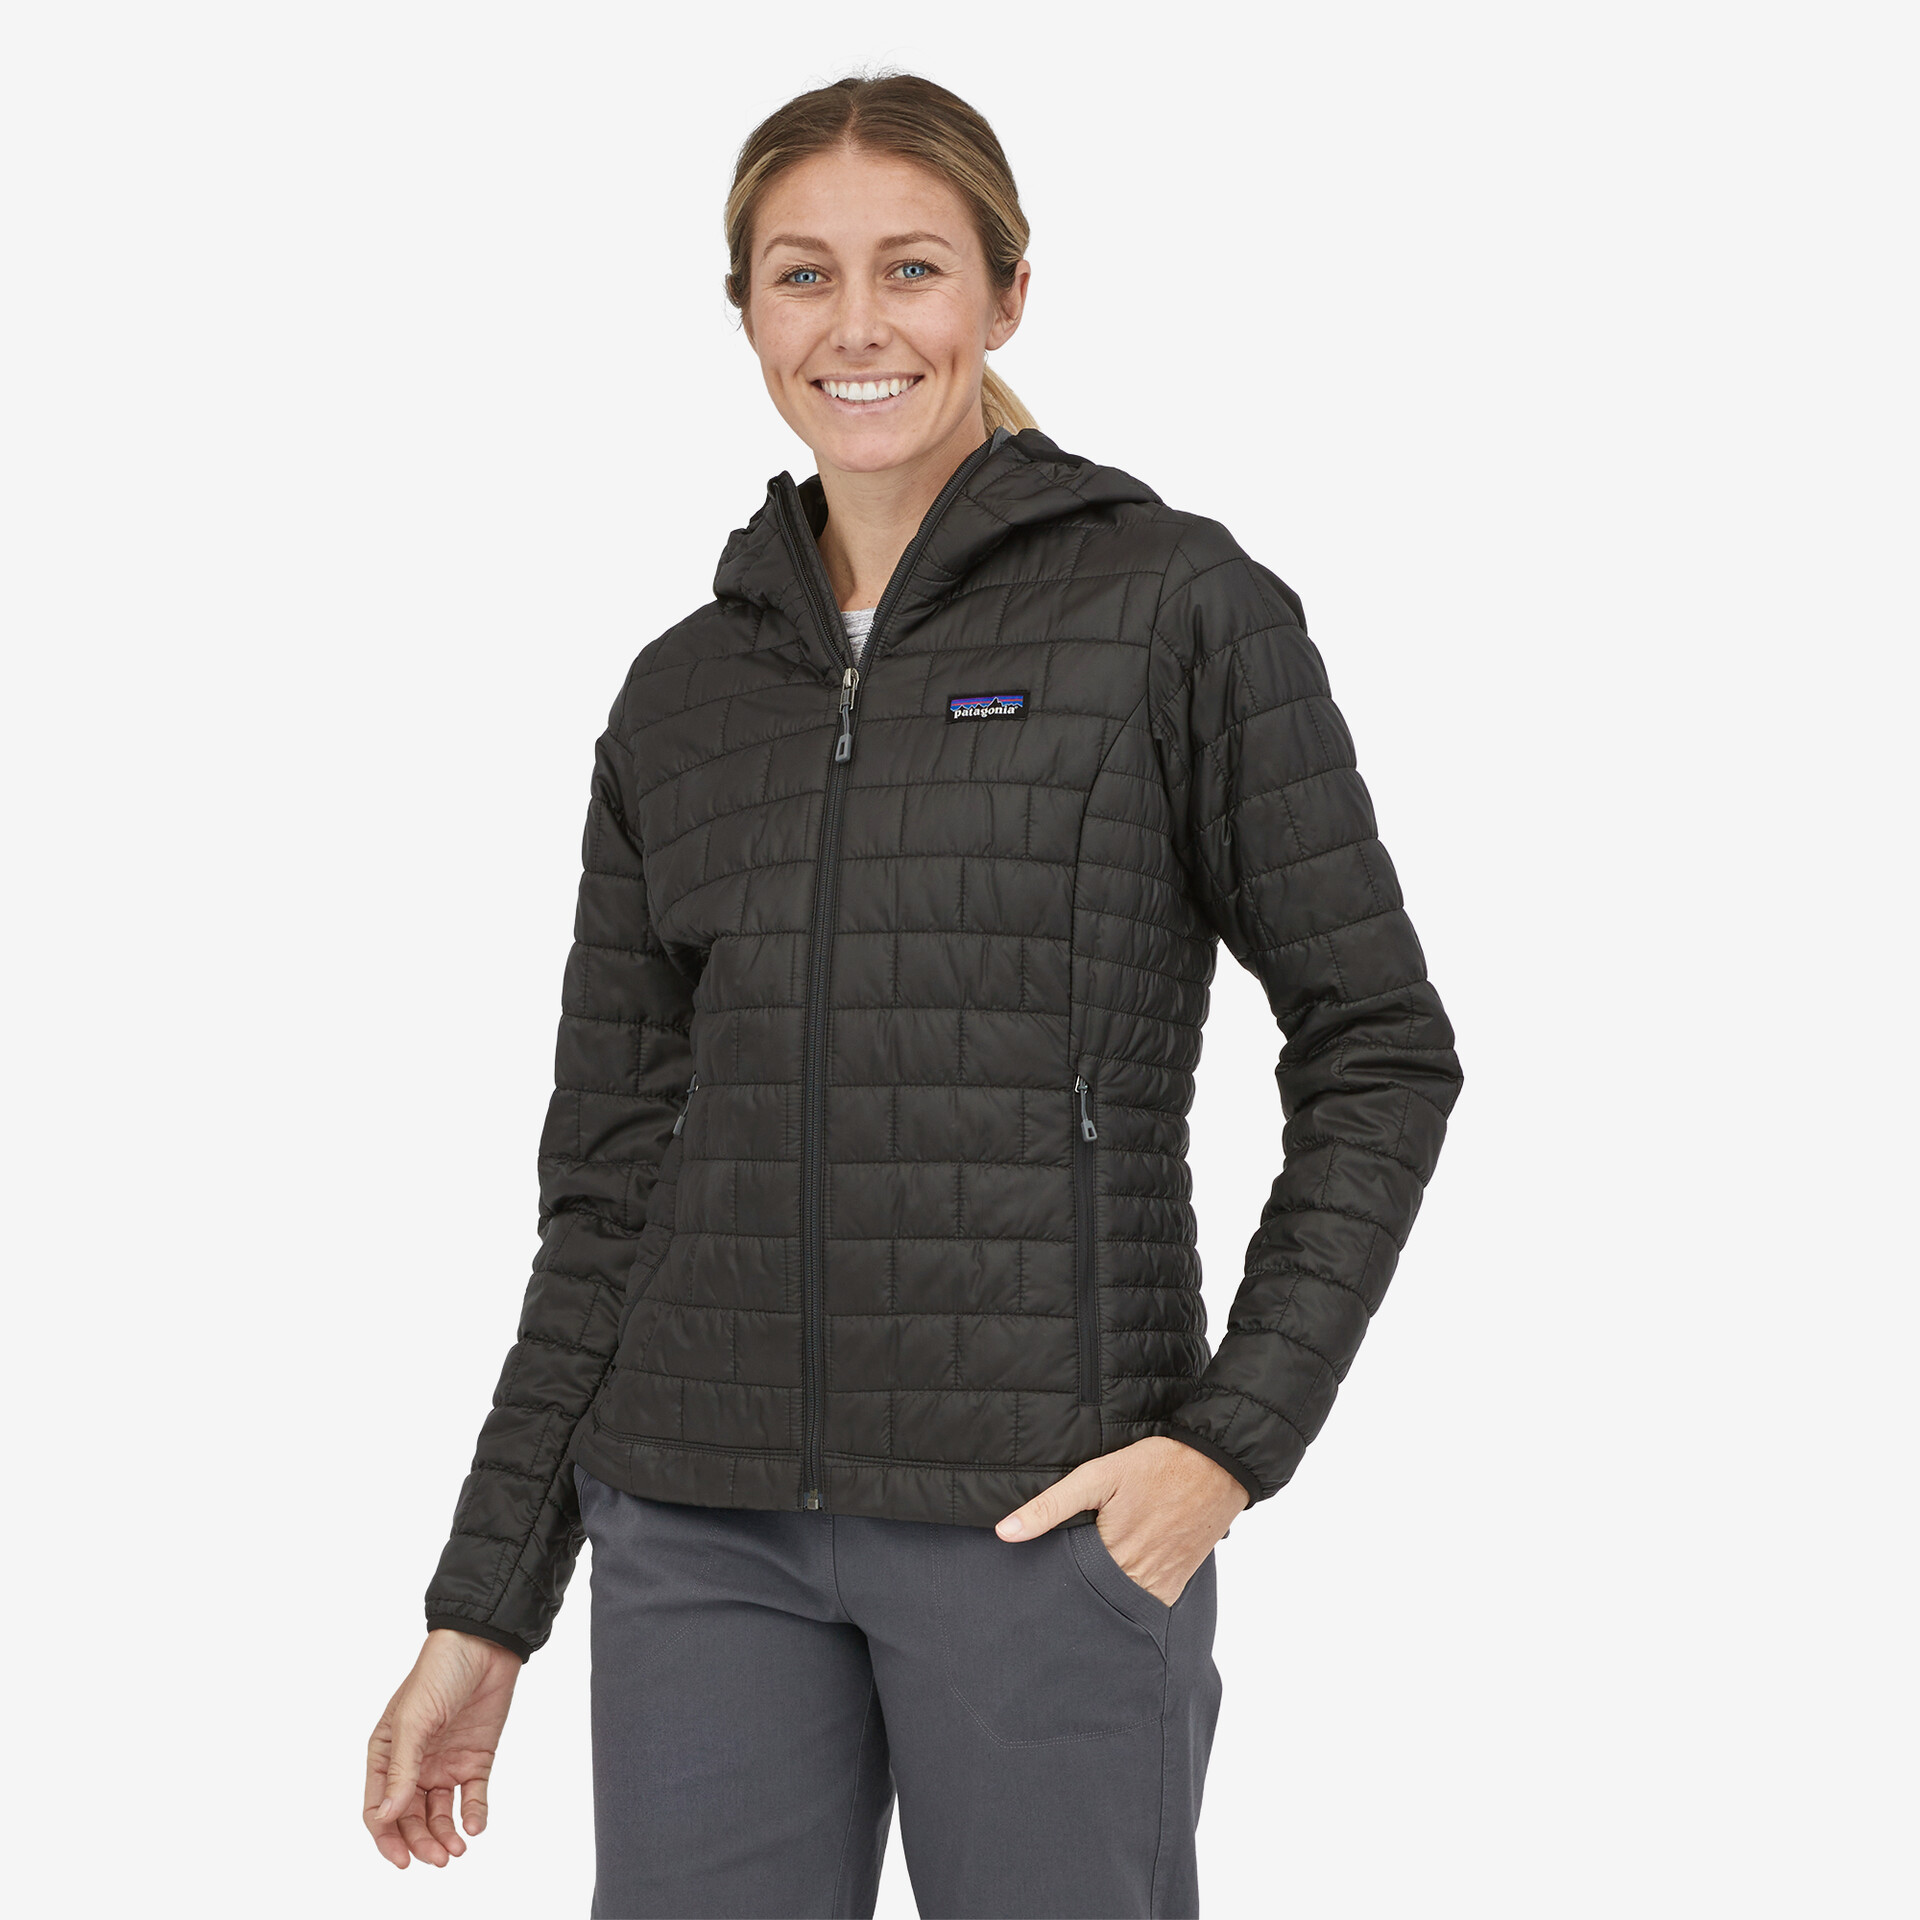 Nano Puff Hoody by Patagonia, sustainable and lightweight insulation for the eco-friendly adventurer.